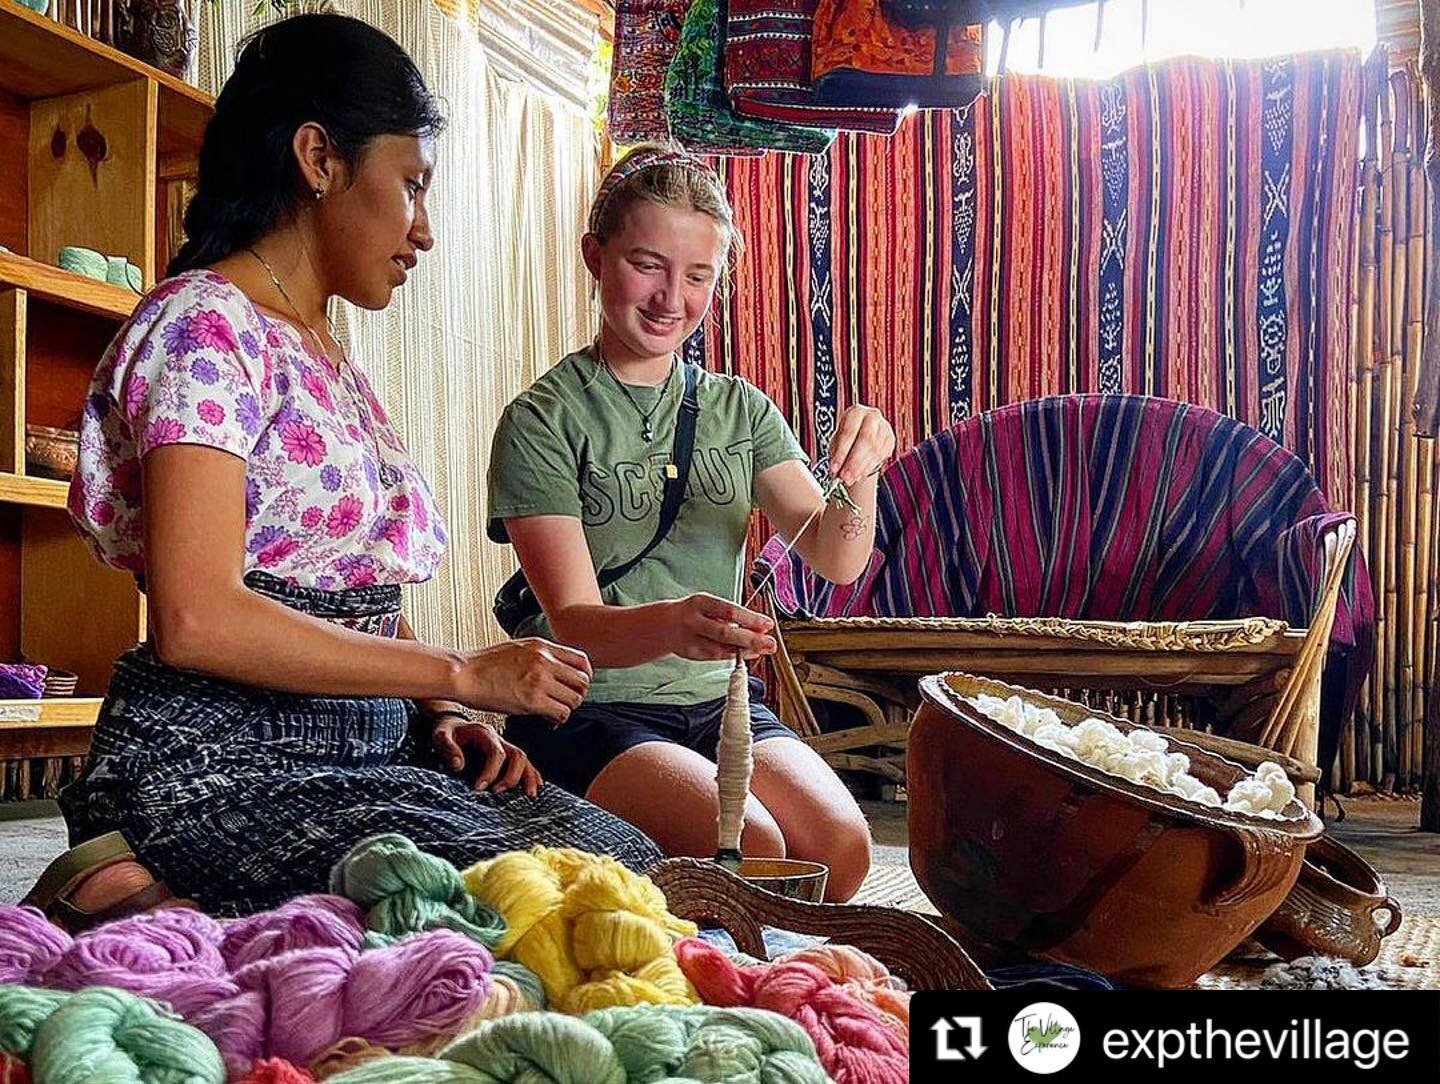 What a great experience of community-based and responsible tourism in Lake Atitl&aacute;n supporting local artisans and business&hellip; #Repost @expthevillage with @use.repost
・・・
Looks like the Ford family is having a blast at #LakeAtitlan with @in